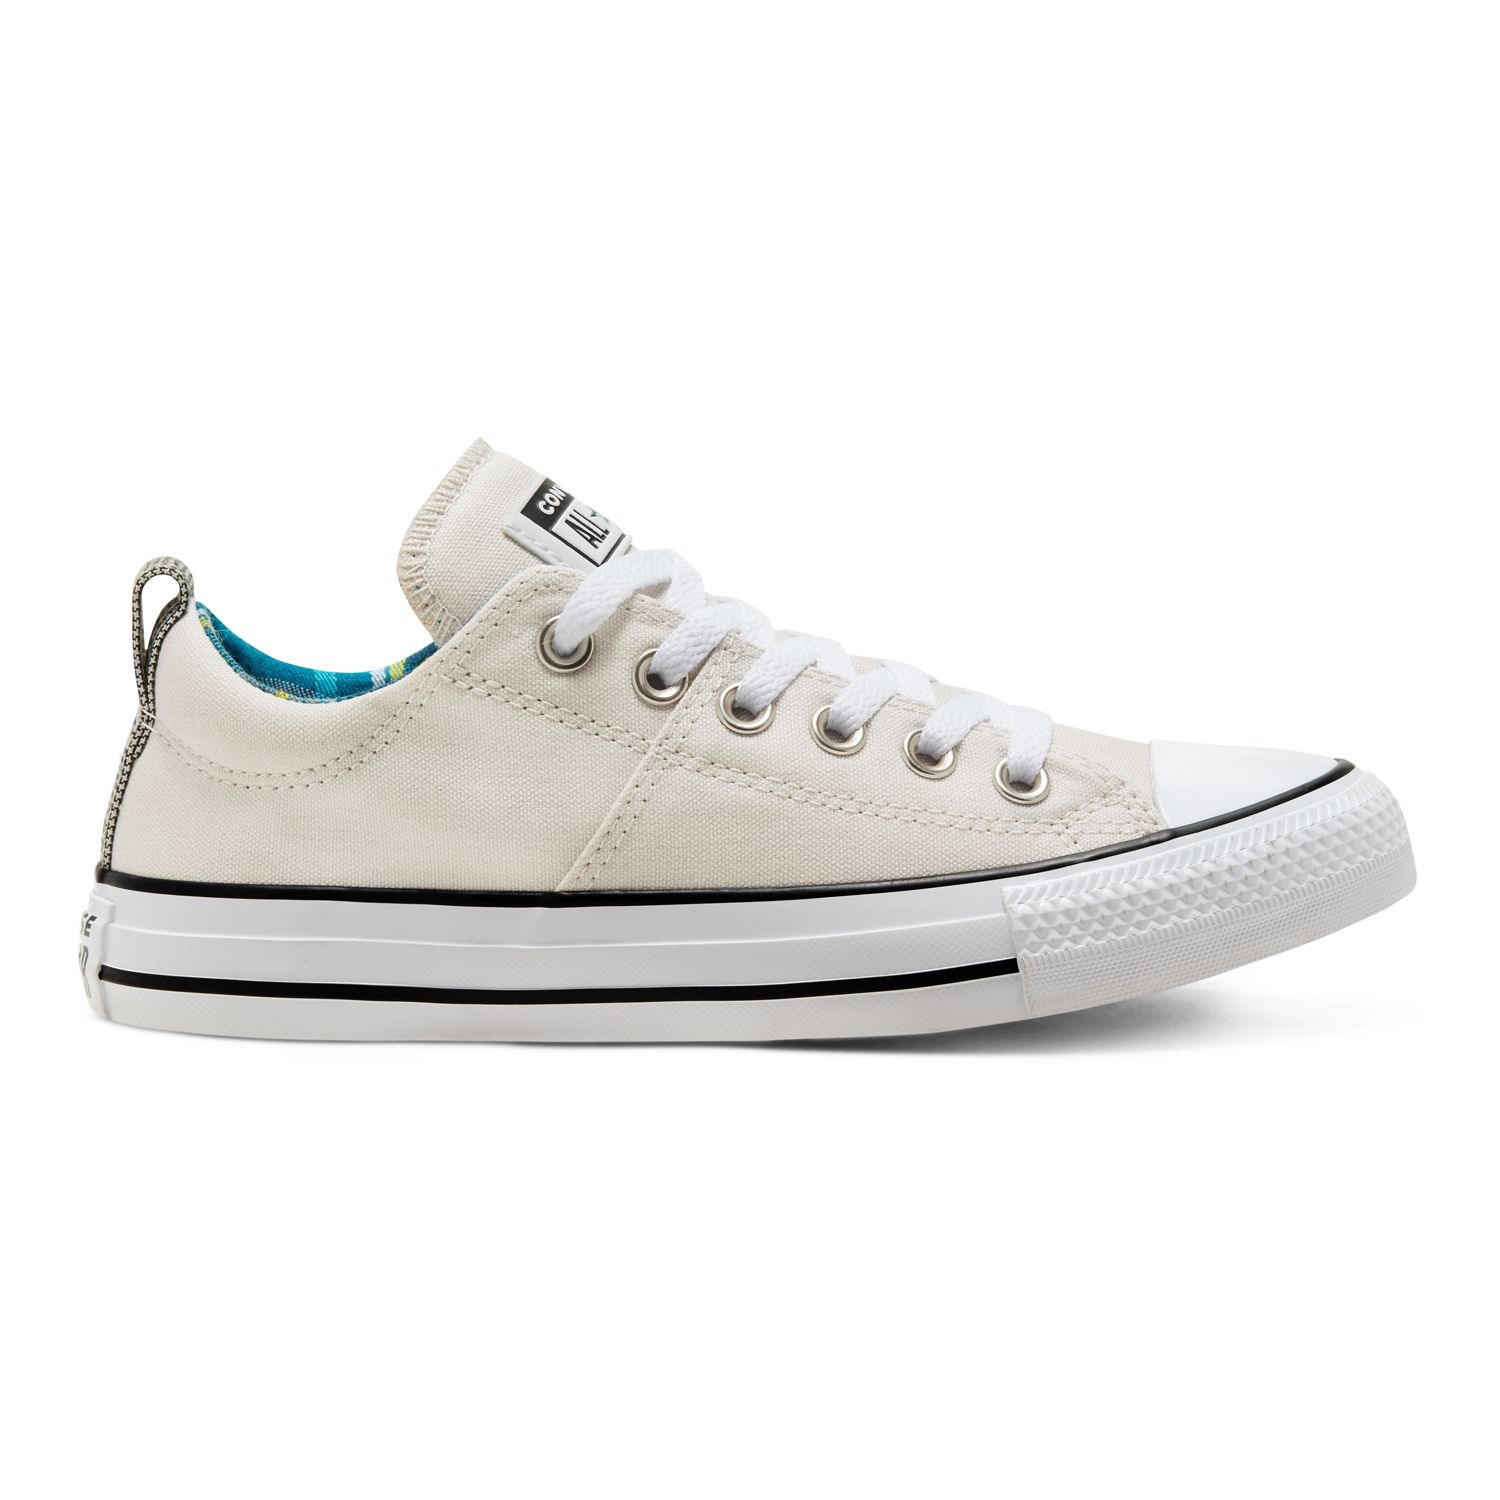 women's converse chuck taylor all star plaid sneakers